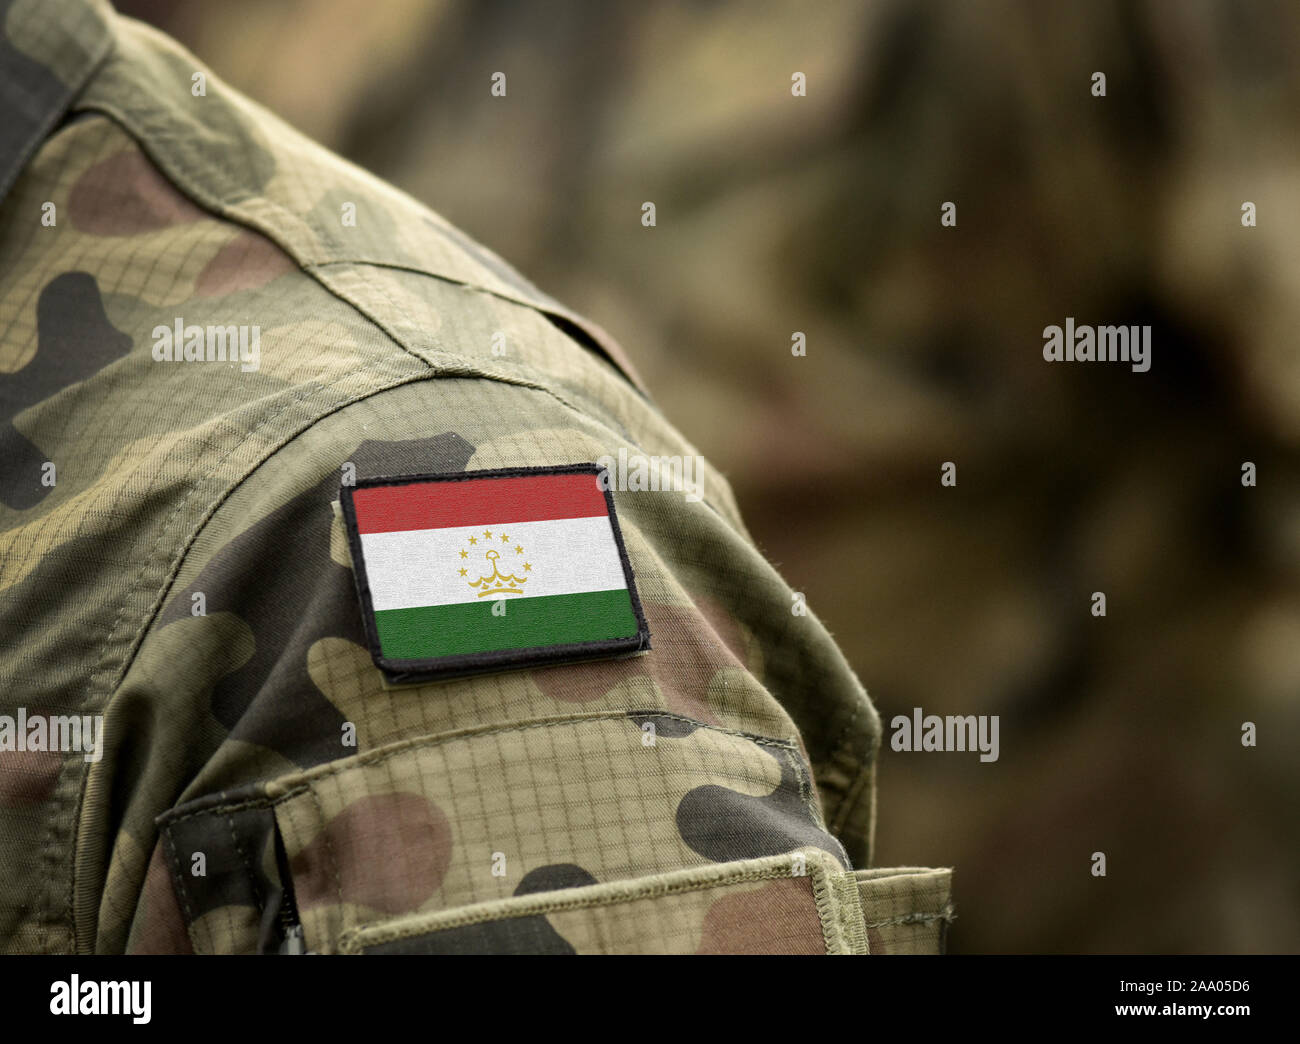 Flag of Tajikistan on military uniform. Army, armed forces, soldiers. Collage. Stock Photo